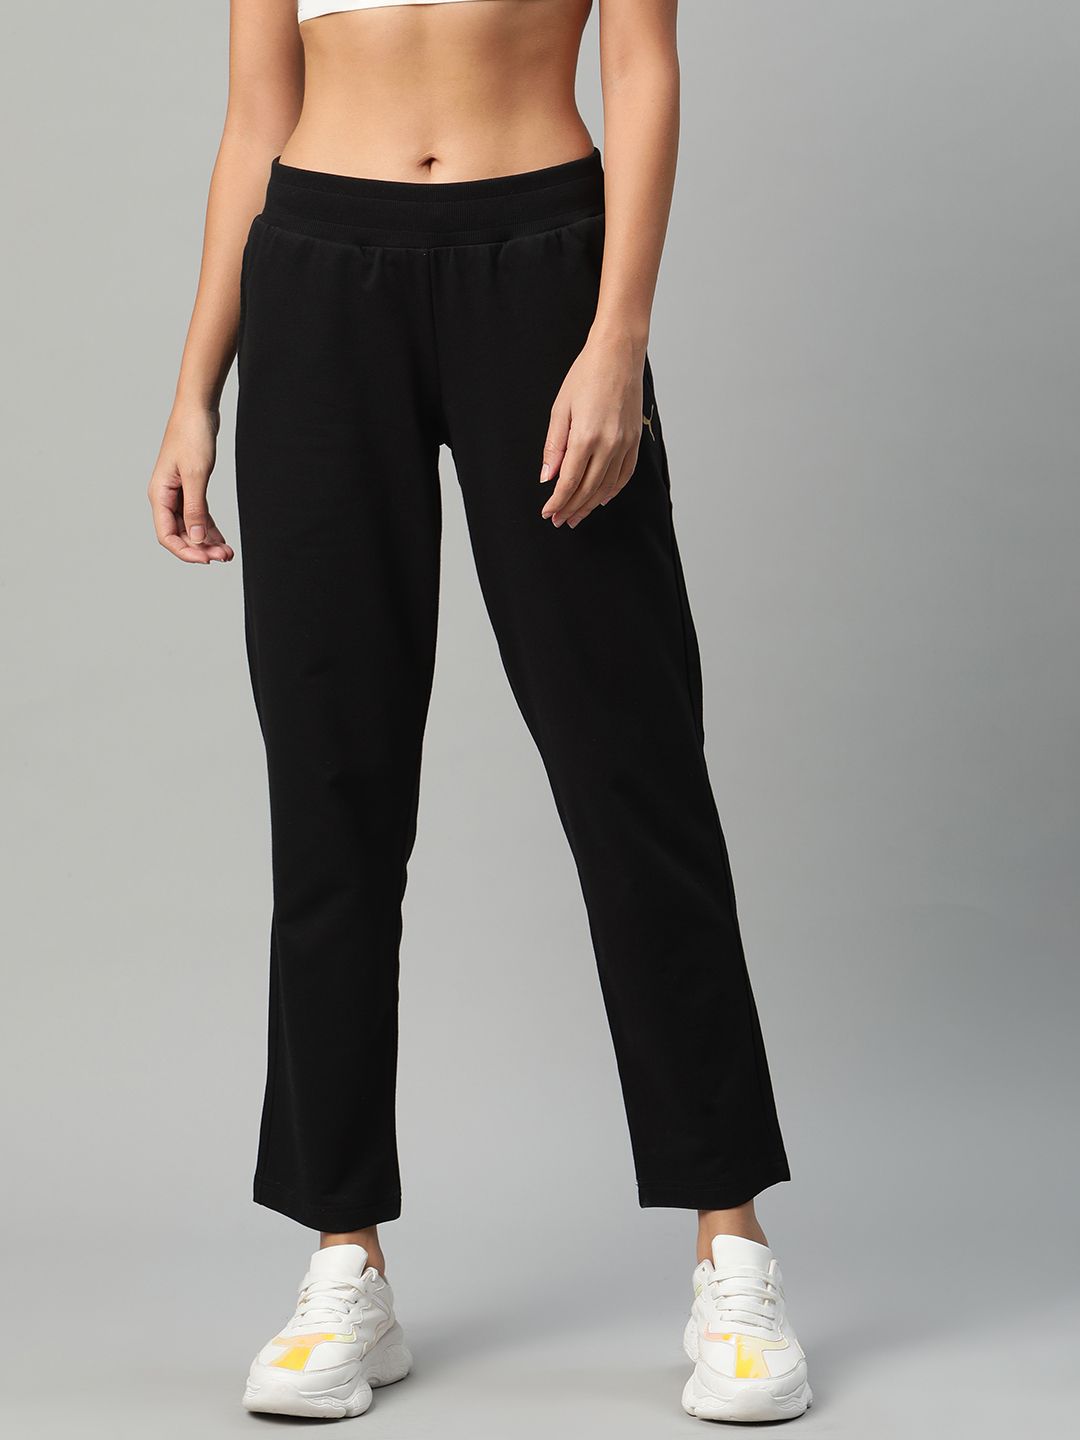 Puma Women Black Graphic 11 Solid Regular Fit Track Pants Price in India